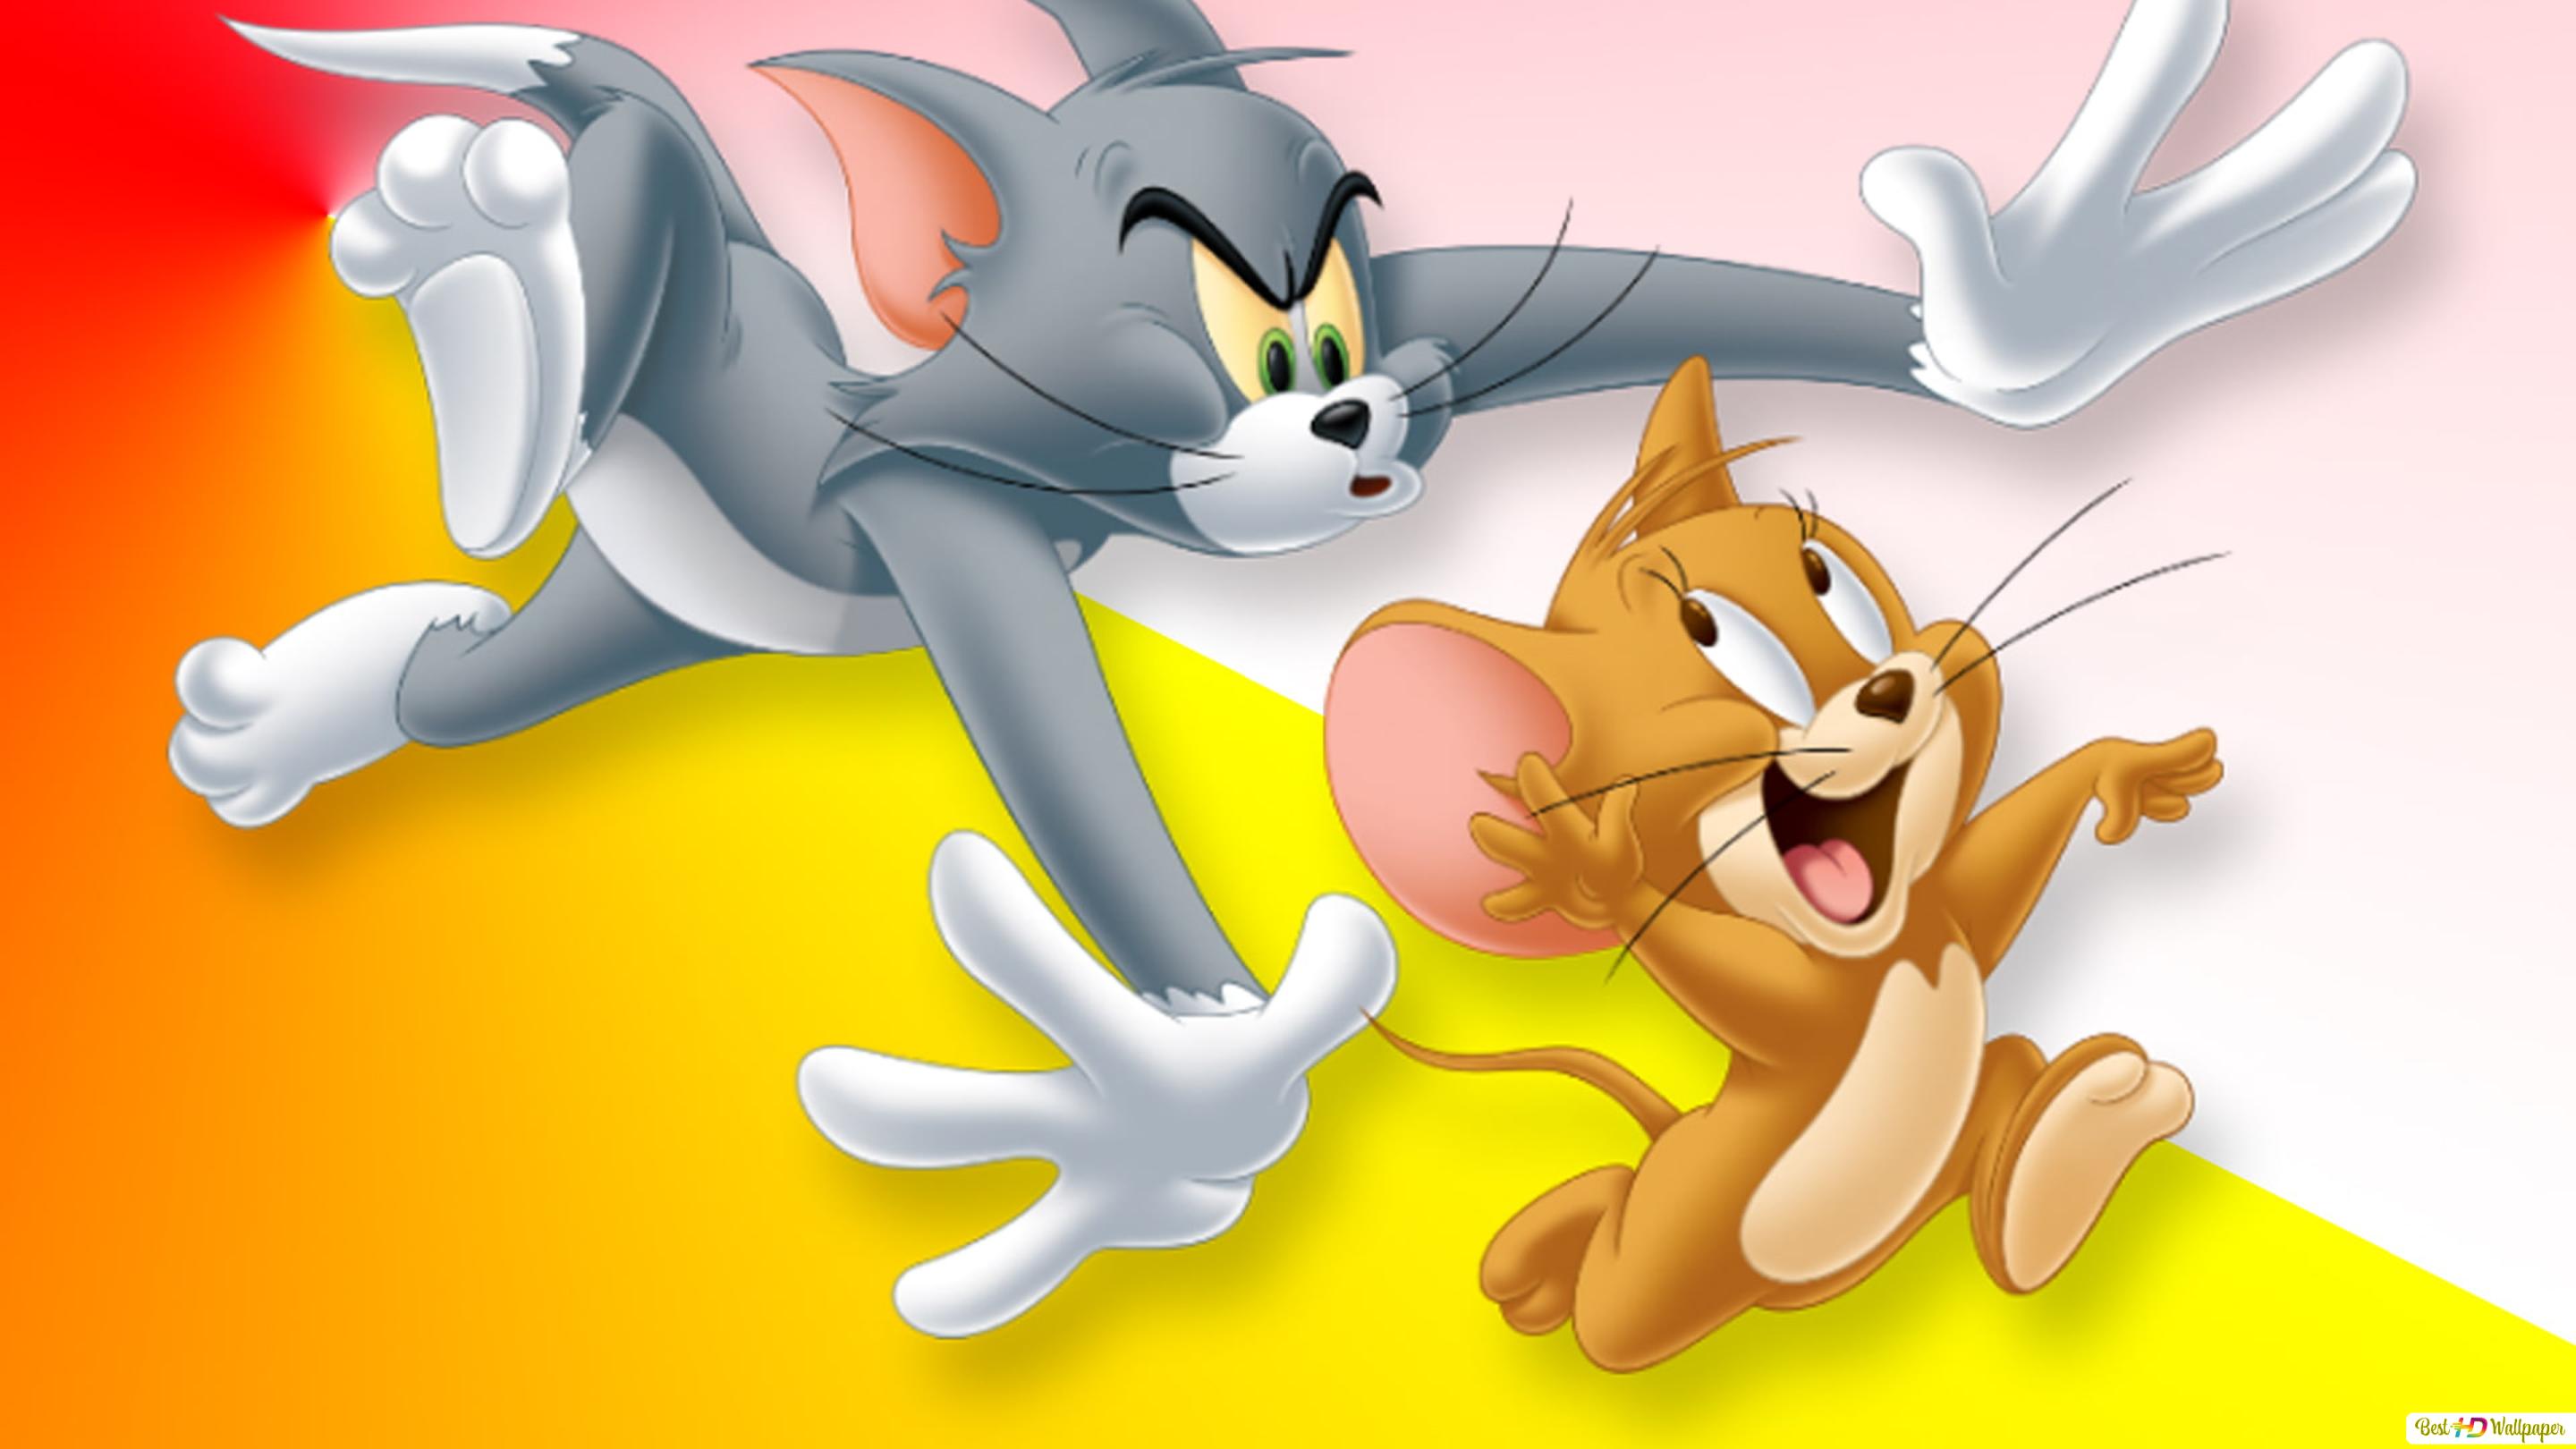 Cool Tom And Jerry Wallpapers Wallpapers